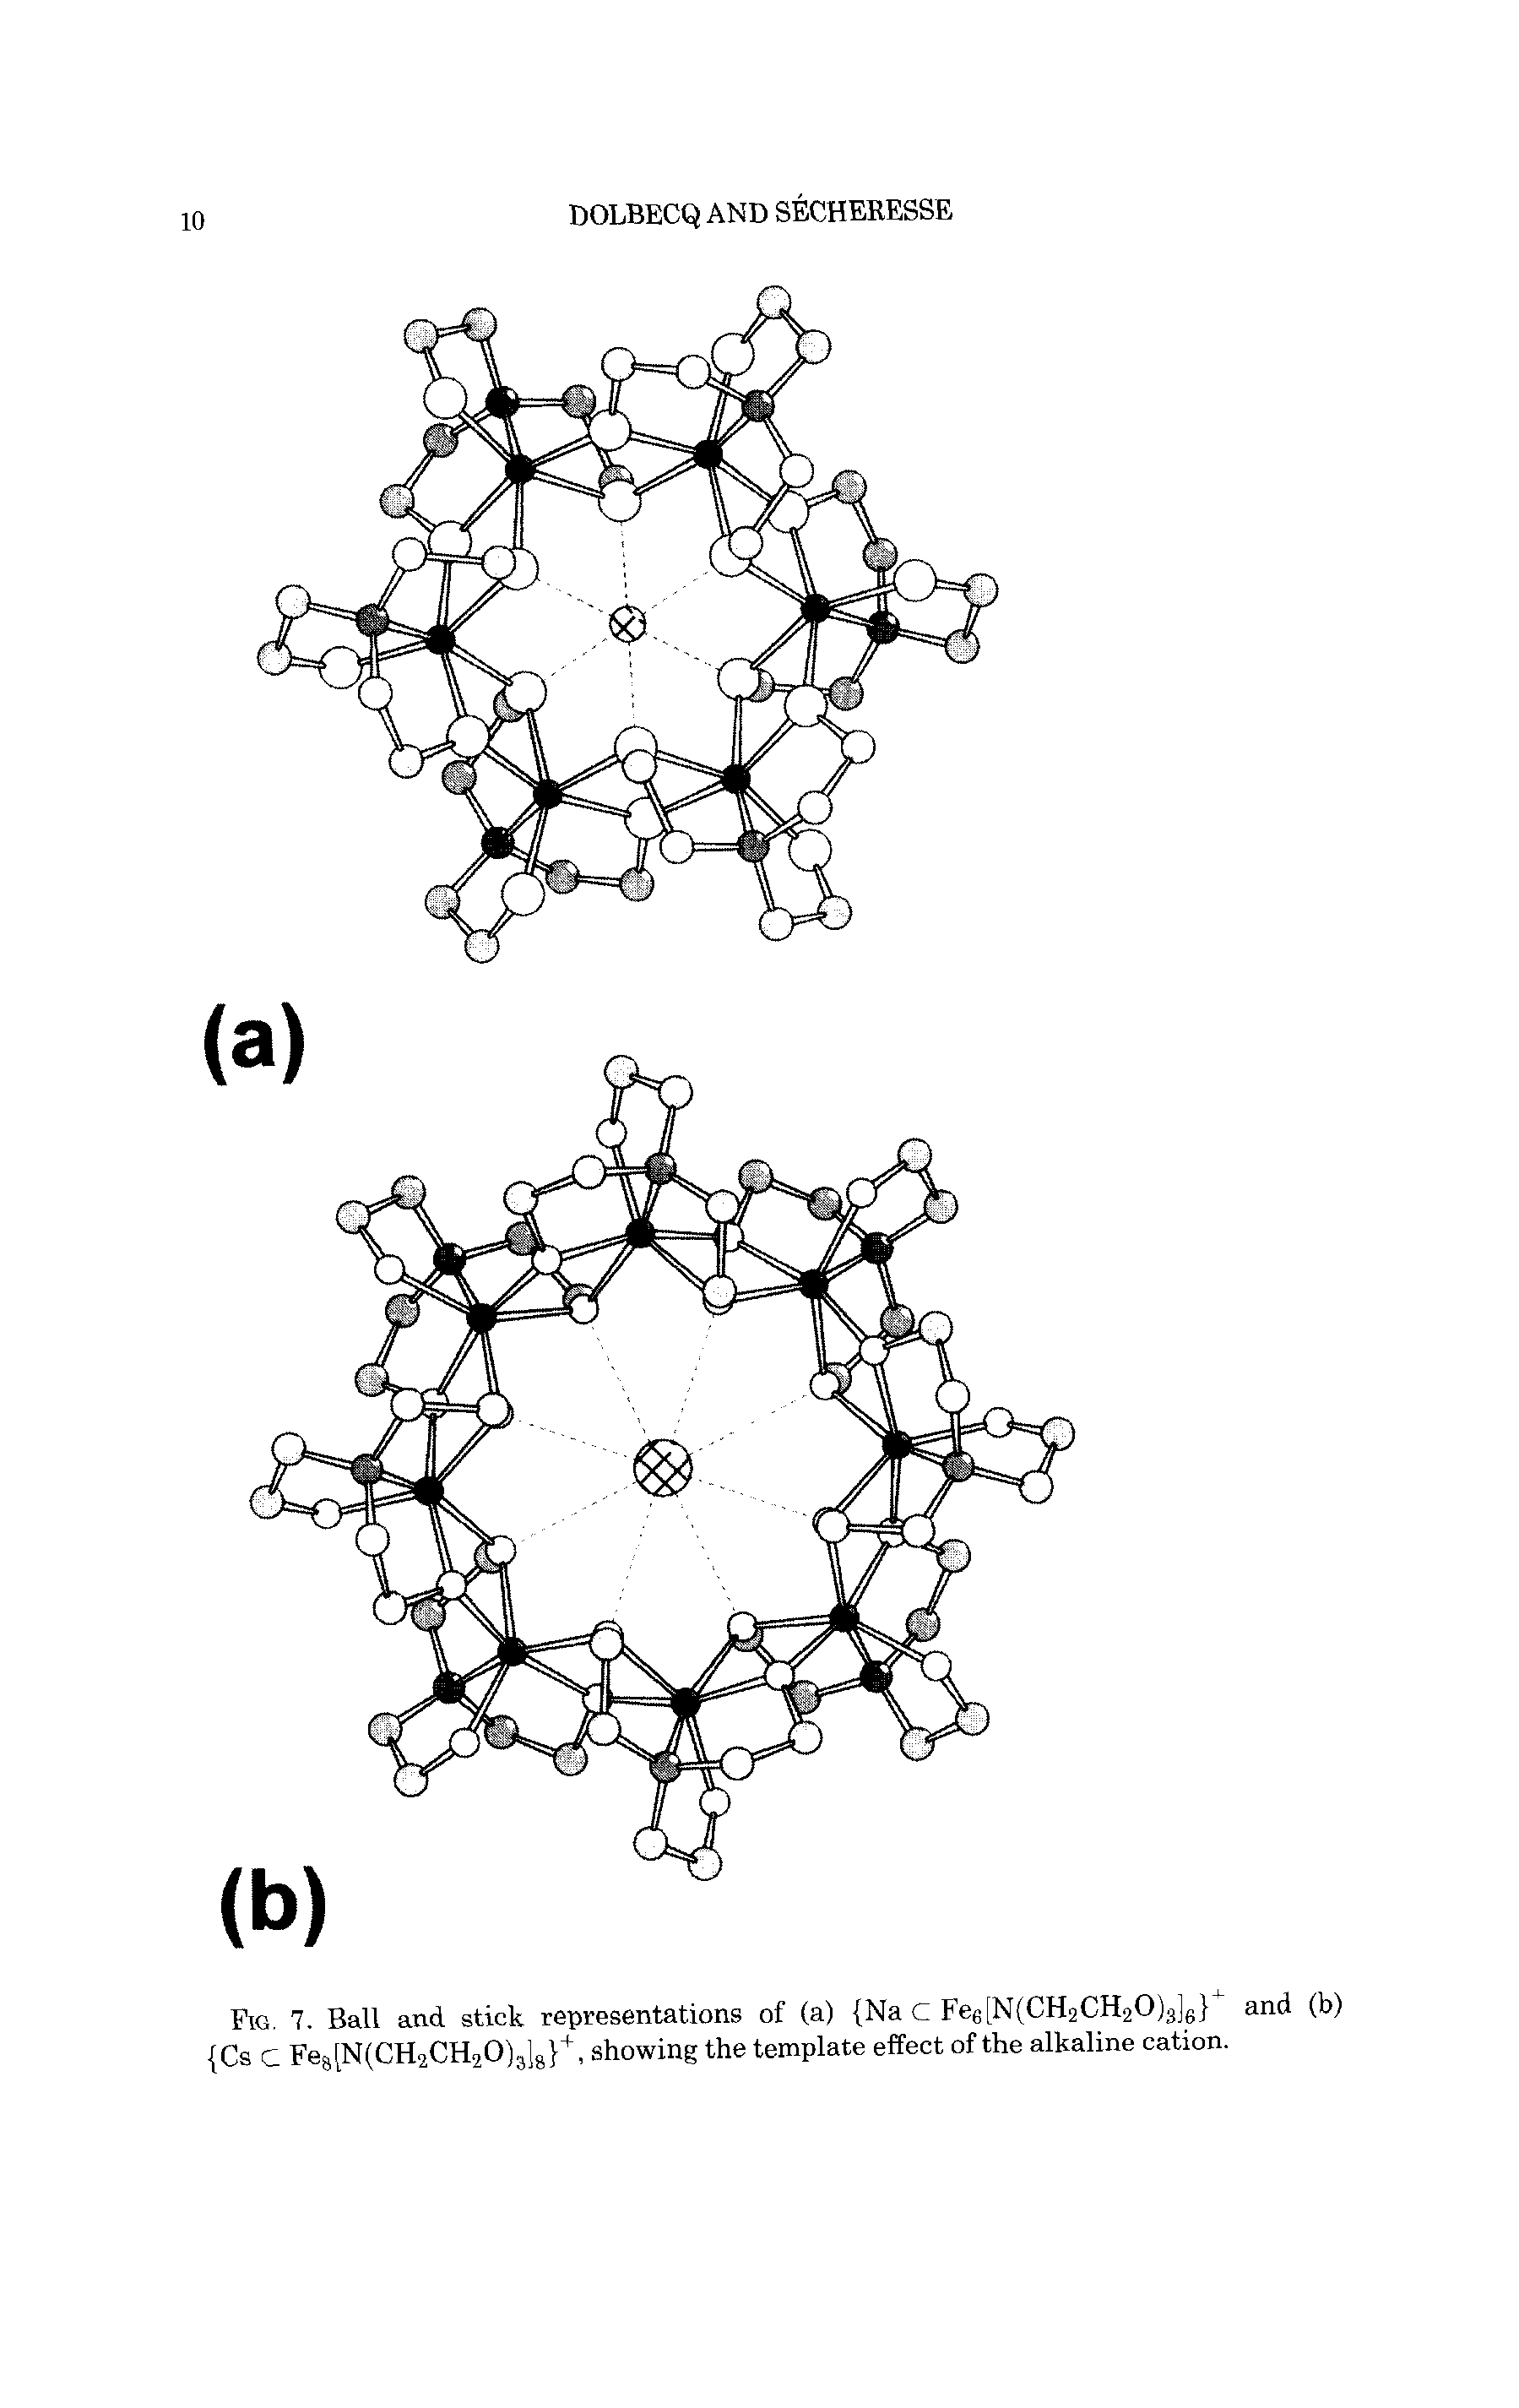 Fig. 7. Ball and stick representations of (a) Na C Fee[N(CH2CH20)3]6 i and (b) Cs C Fe8[N(CH2CH20)3lg +, showing the template effect of the alkaline cation.